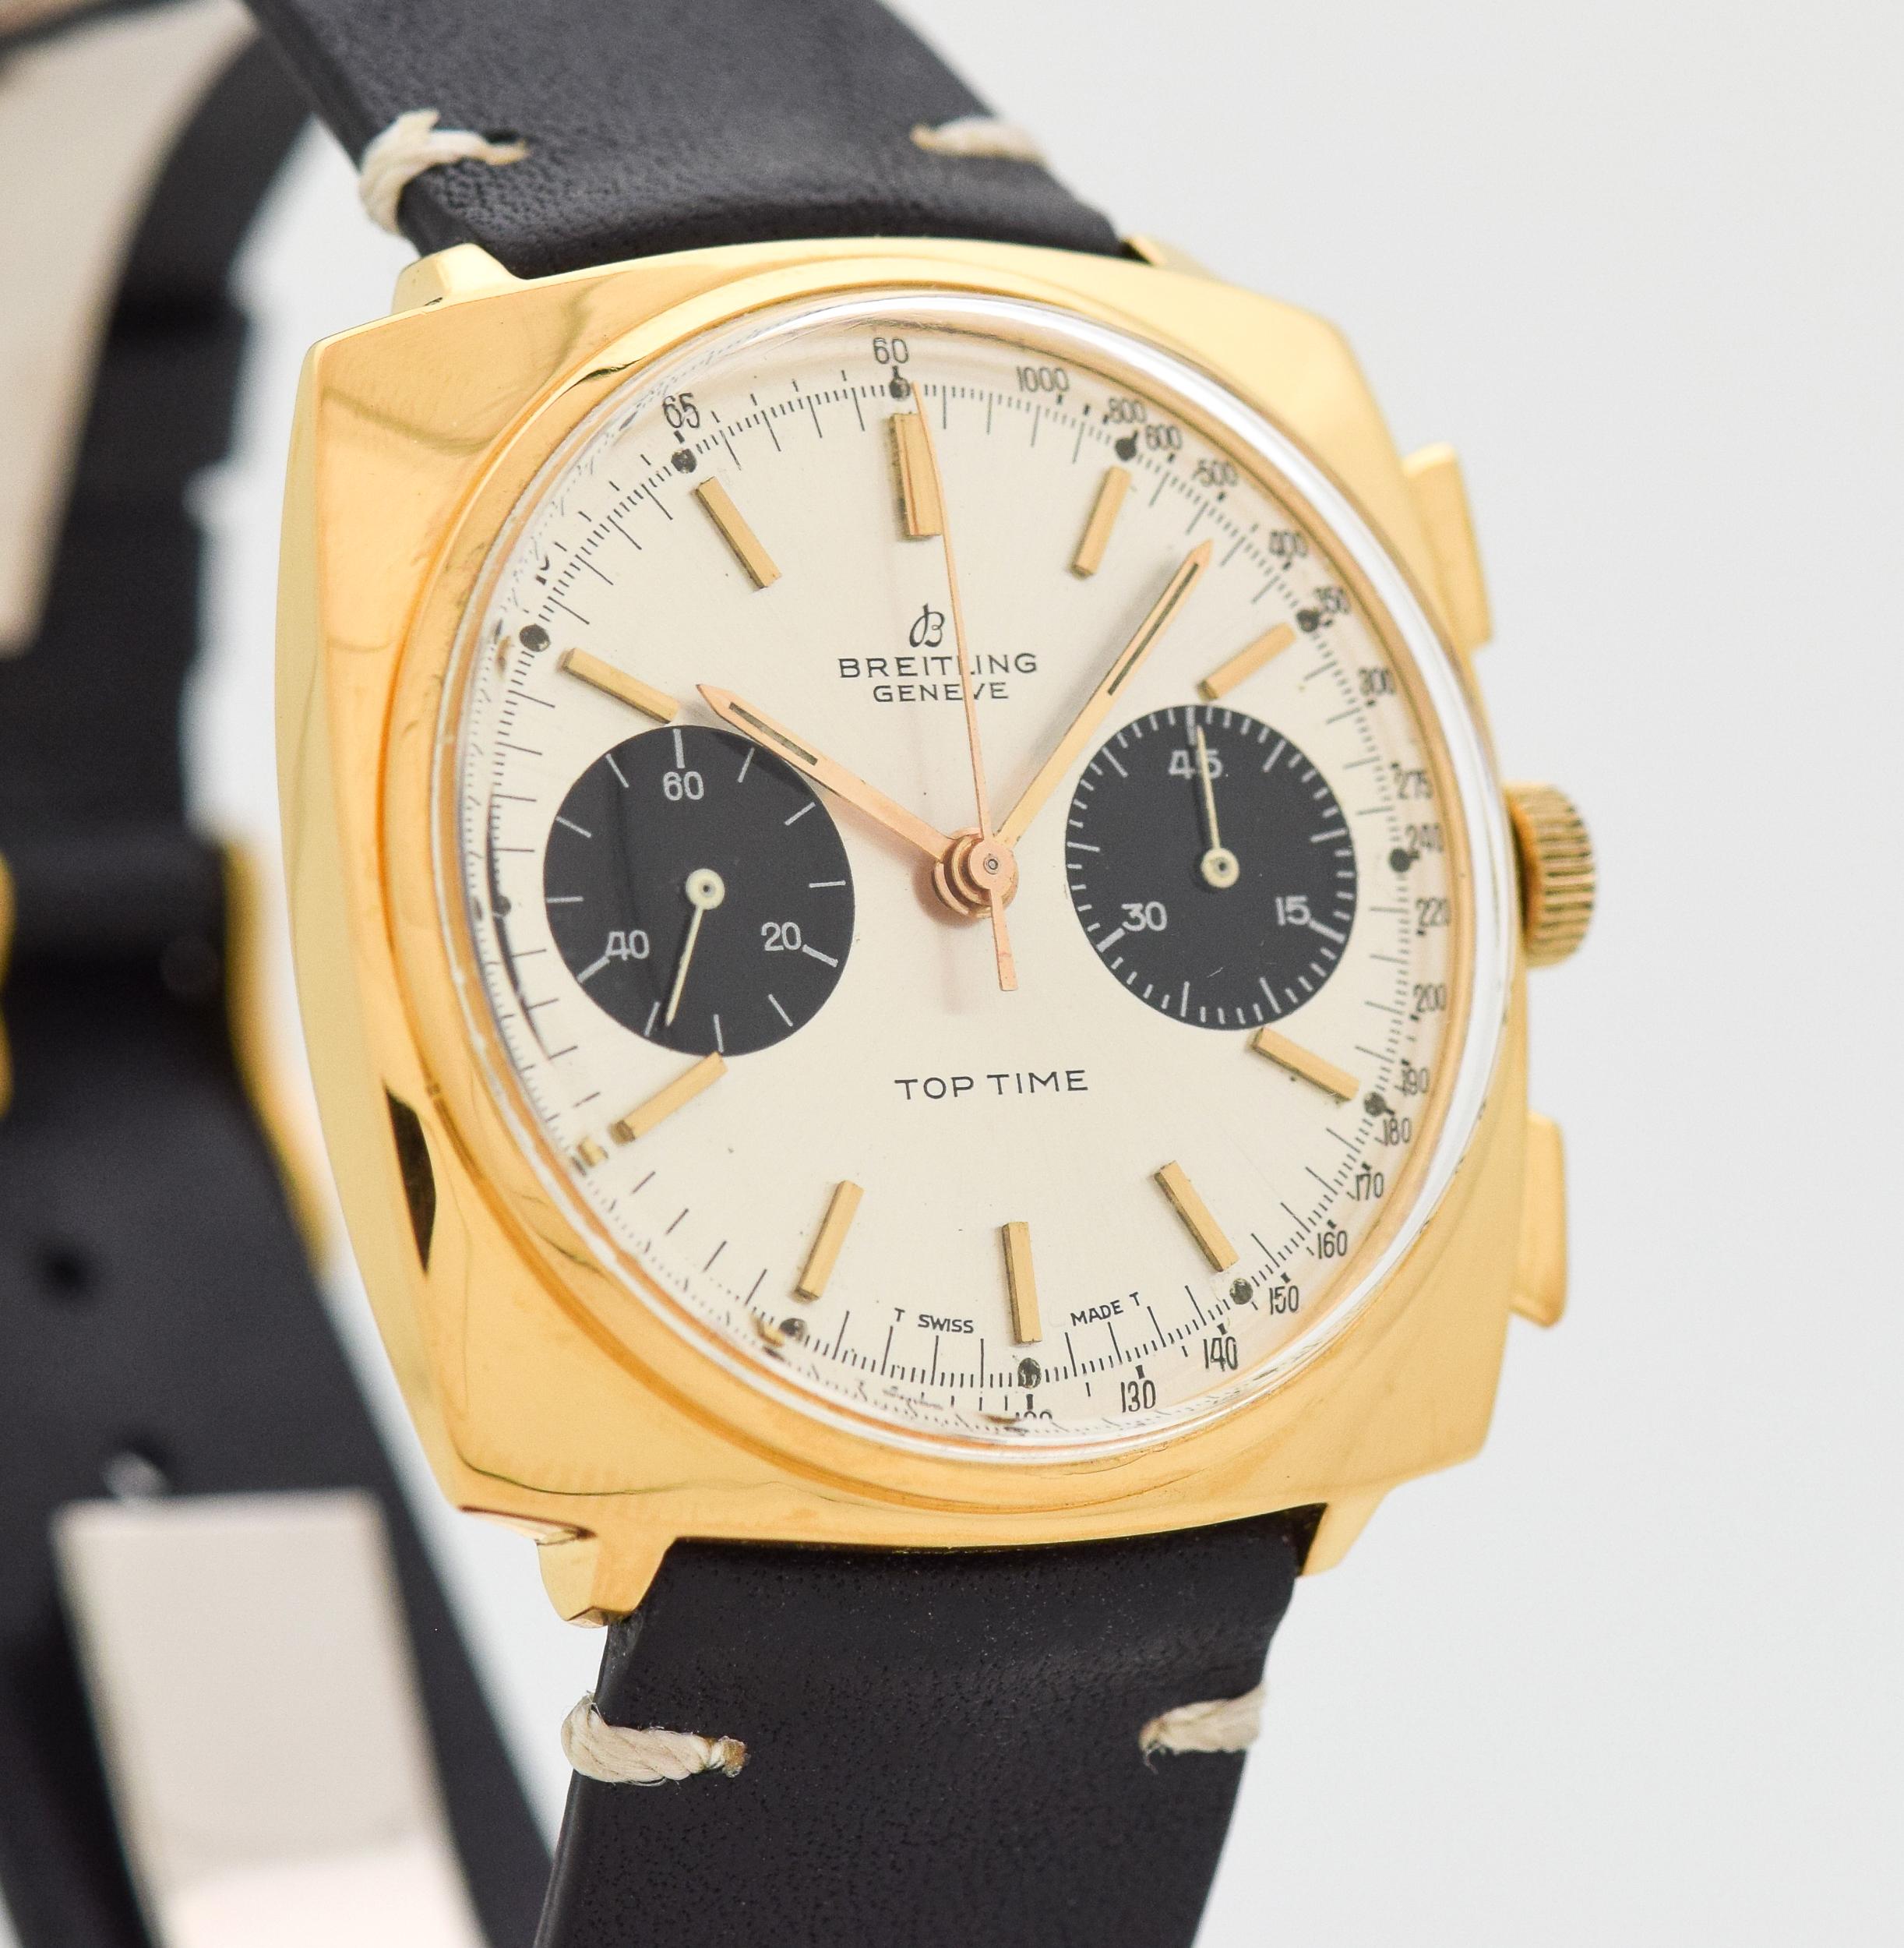 1966 Vintage Breitling Top Time Ref. 2008 Yellow Gold Plated with Stainless Steel Case Back with Original Panda Two Tone Silver and Black Dial with Applied Gold Color Beveled Stick/Bar/Baton Markers. 36mm x 38mm lug to lug (1.42 in. x 1.5 in.) - 17